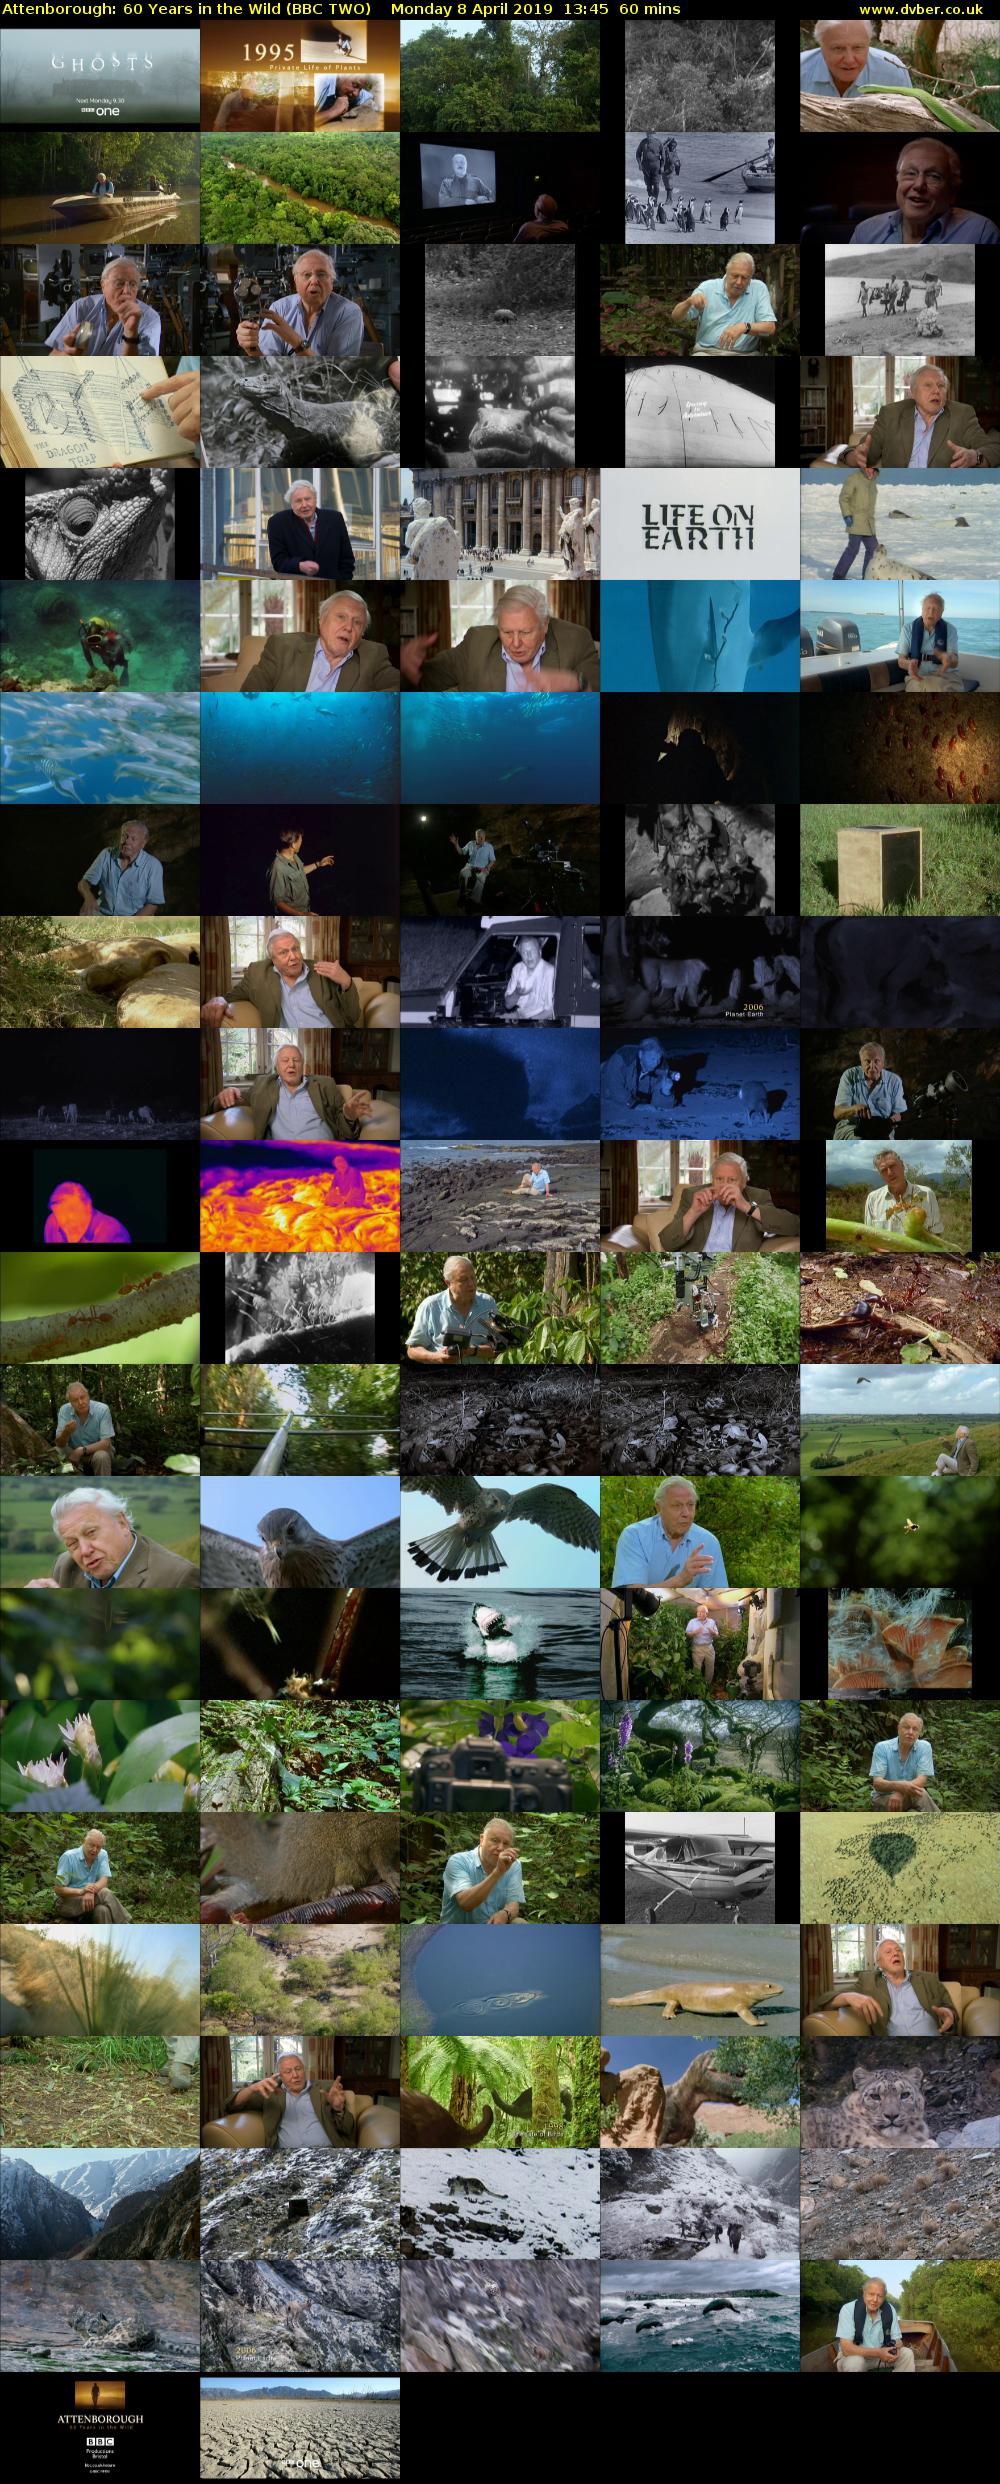 Attenborough: 60 Years in the Wild (BBC TWO) Monday 8 April 2019 13:45 - 14:45